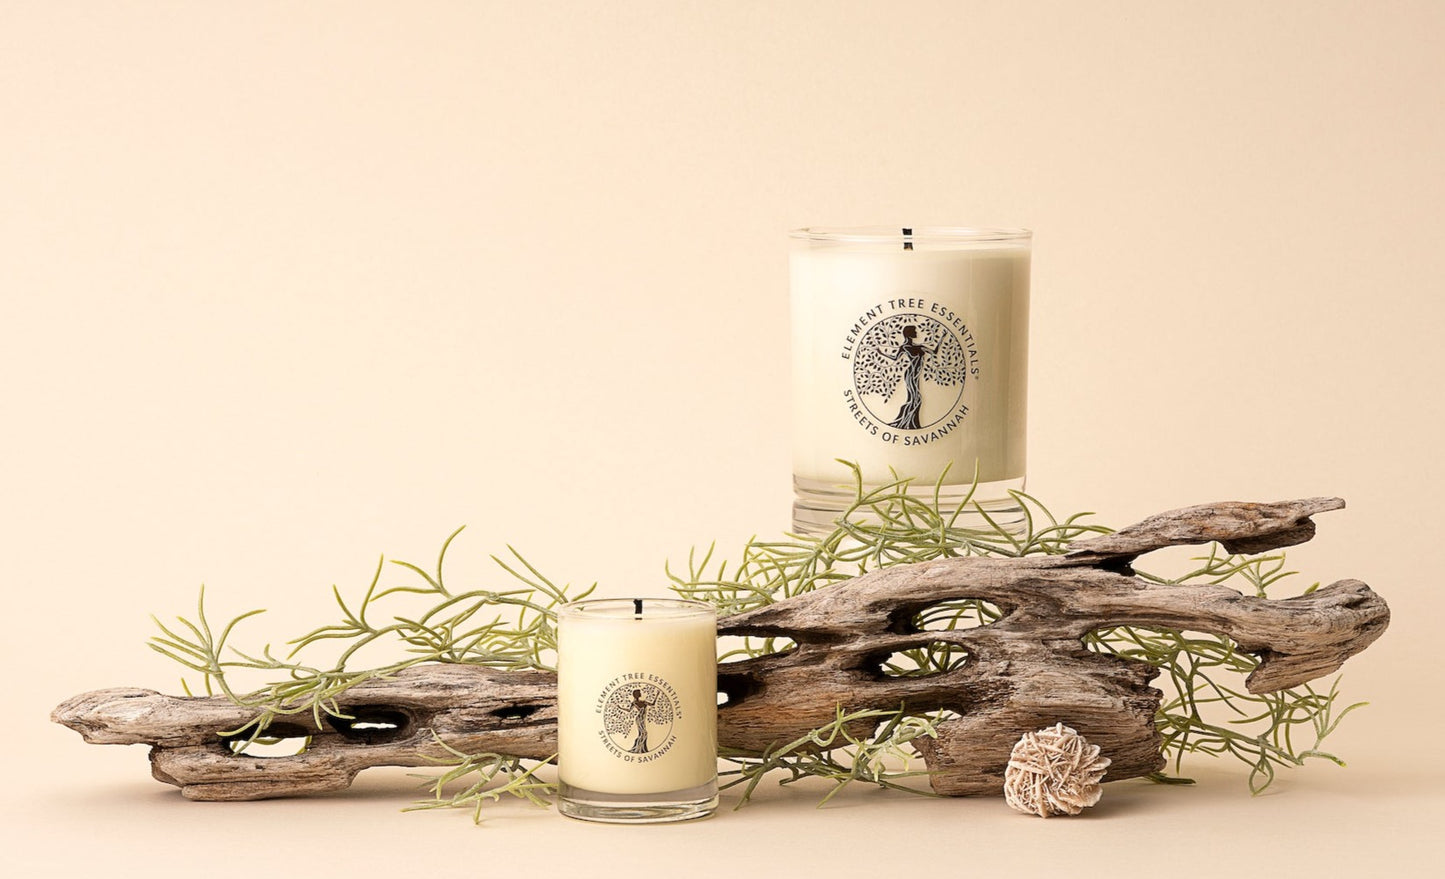 Streets of Savannah Lotion Candle